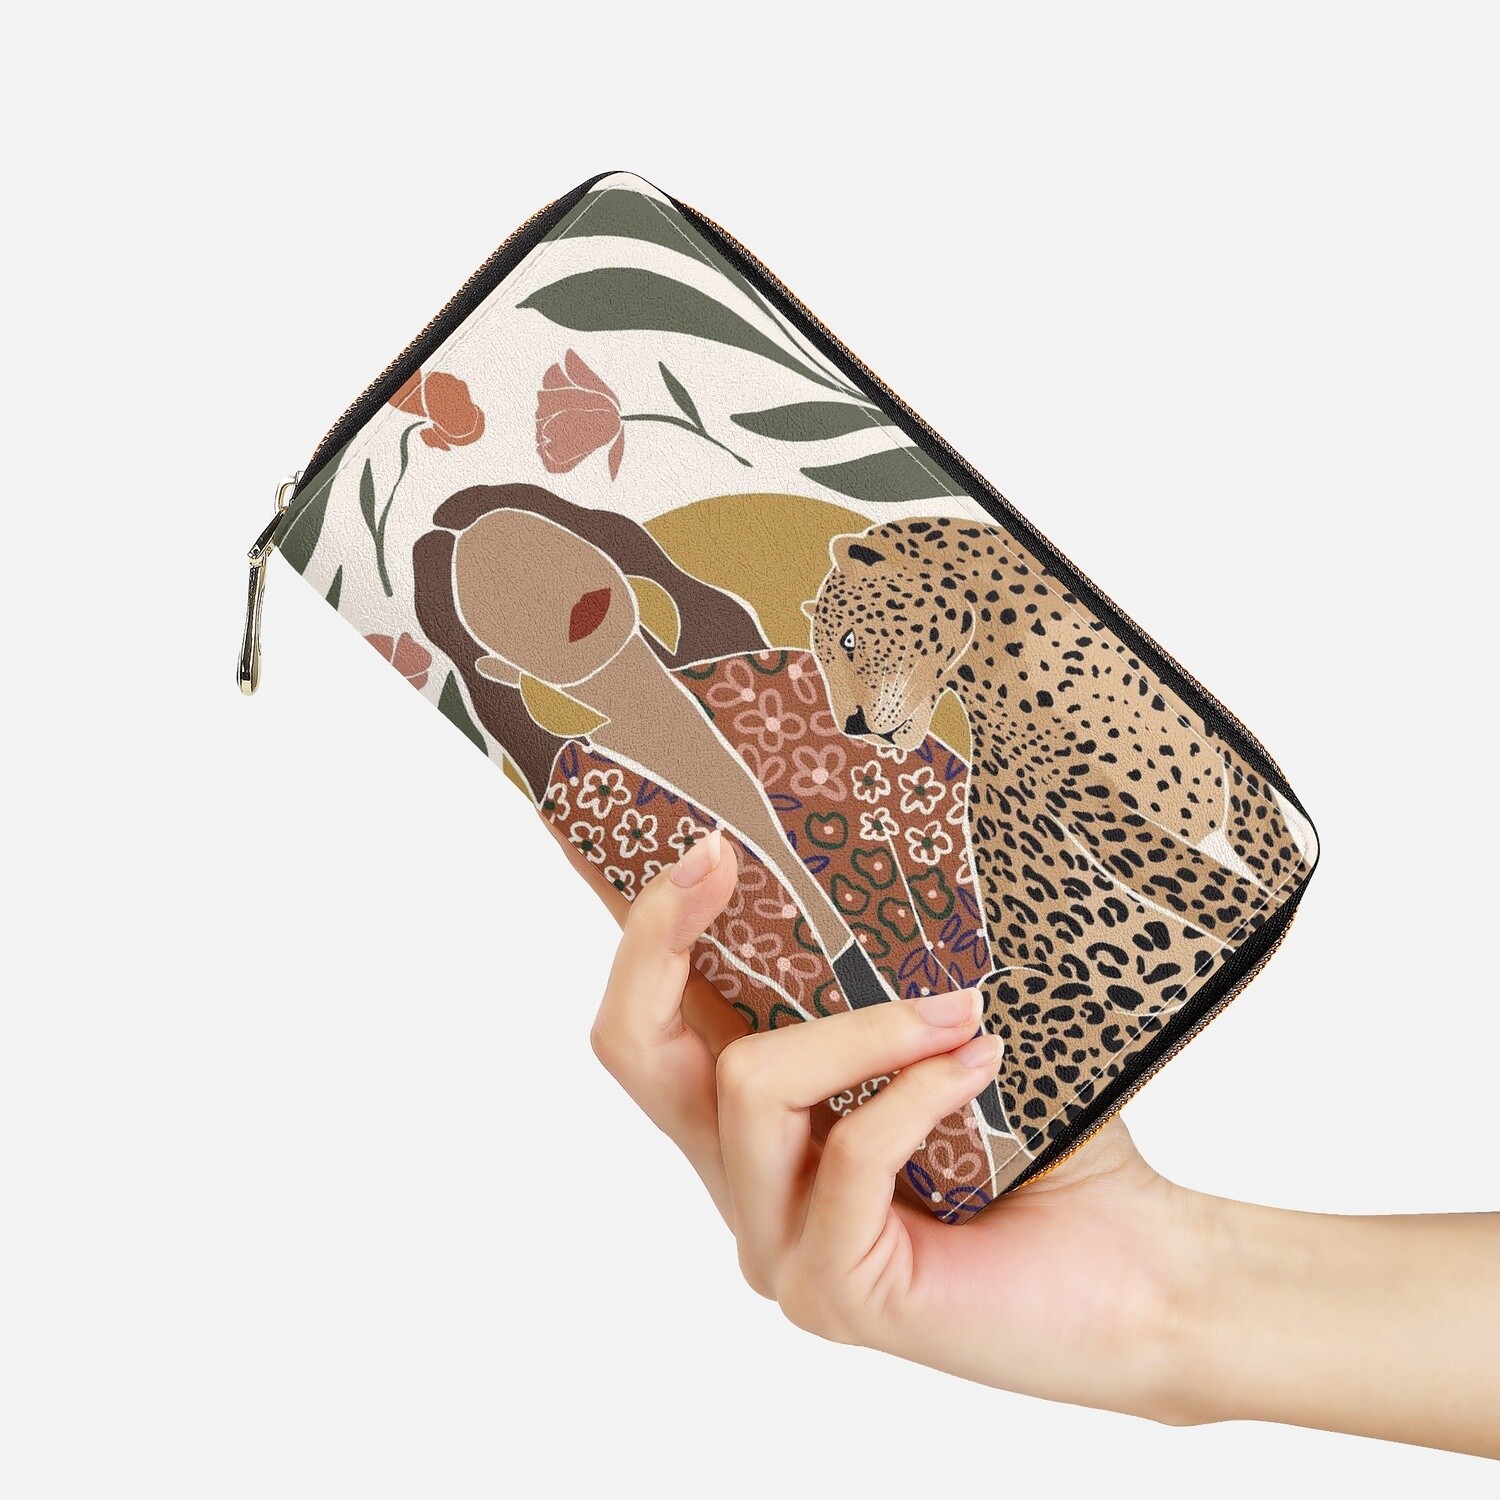 Long Zipper Abstract Woman with Leopard Purse